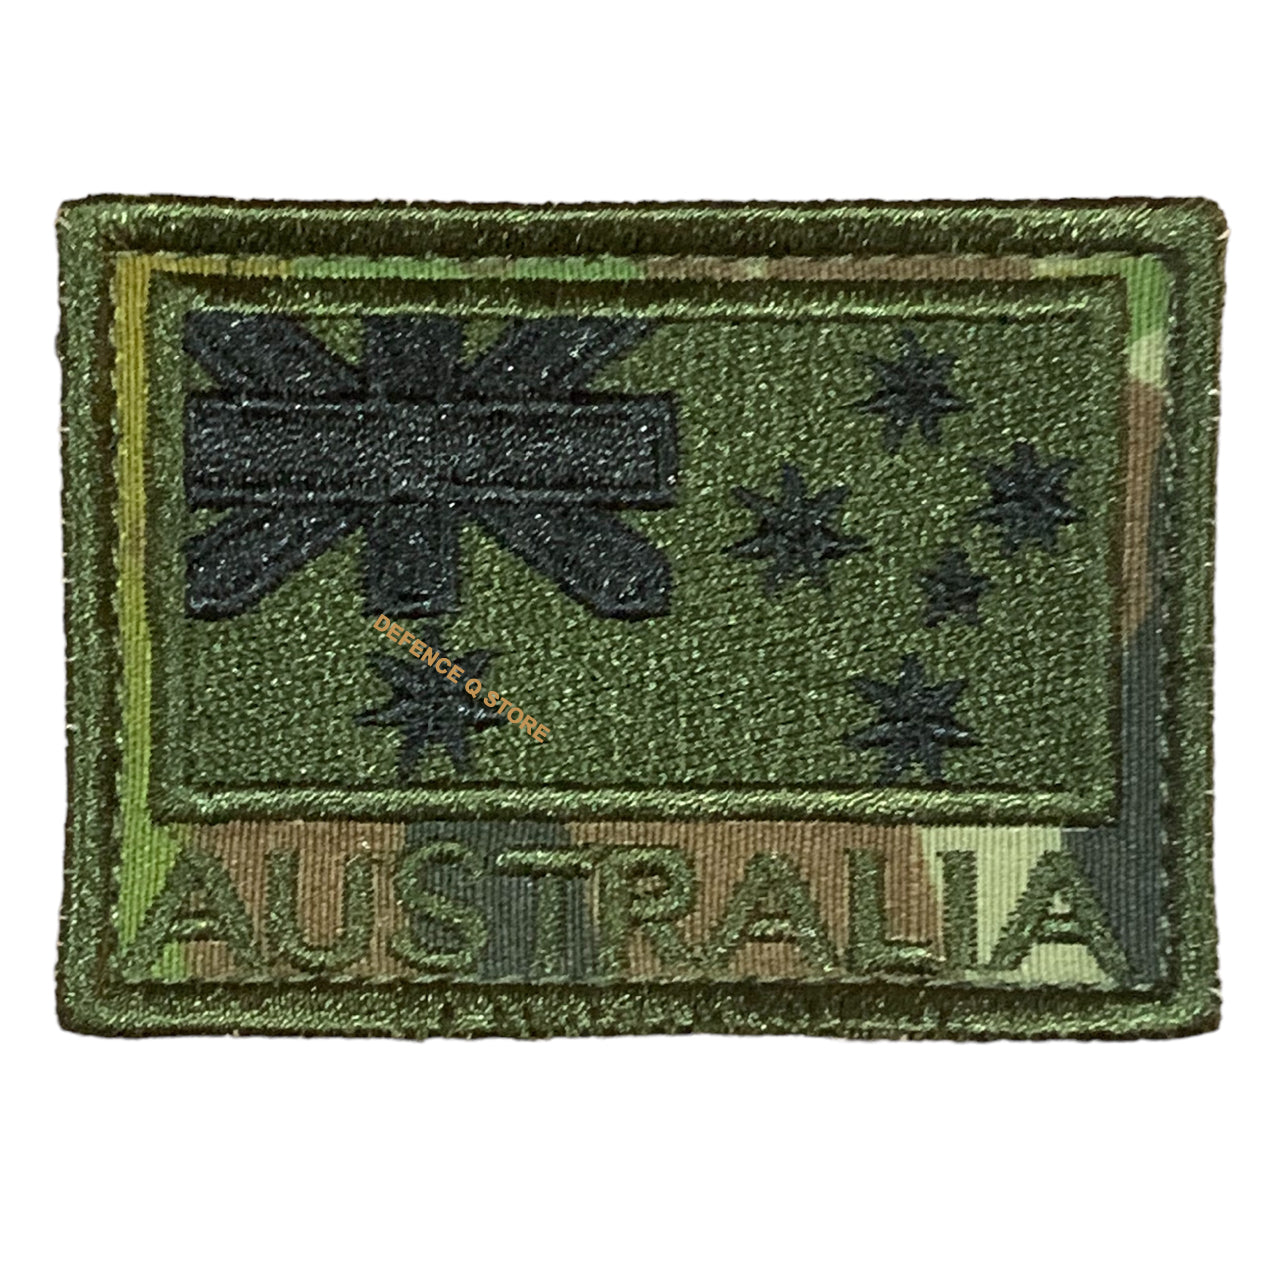 Add a touch of charm to your attire with this Green Embroidery Velcro Backed Patch Auscam, featuring the iconic Australian National Flag. Measuring 5cm X 7cm, it is the perfect addition to your jacket, pack or cap. Show your love for your country in a stylish and patriotic way! www.defenceqstore.com.au